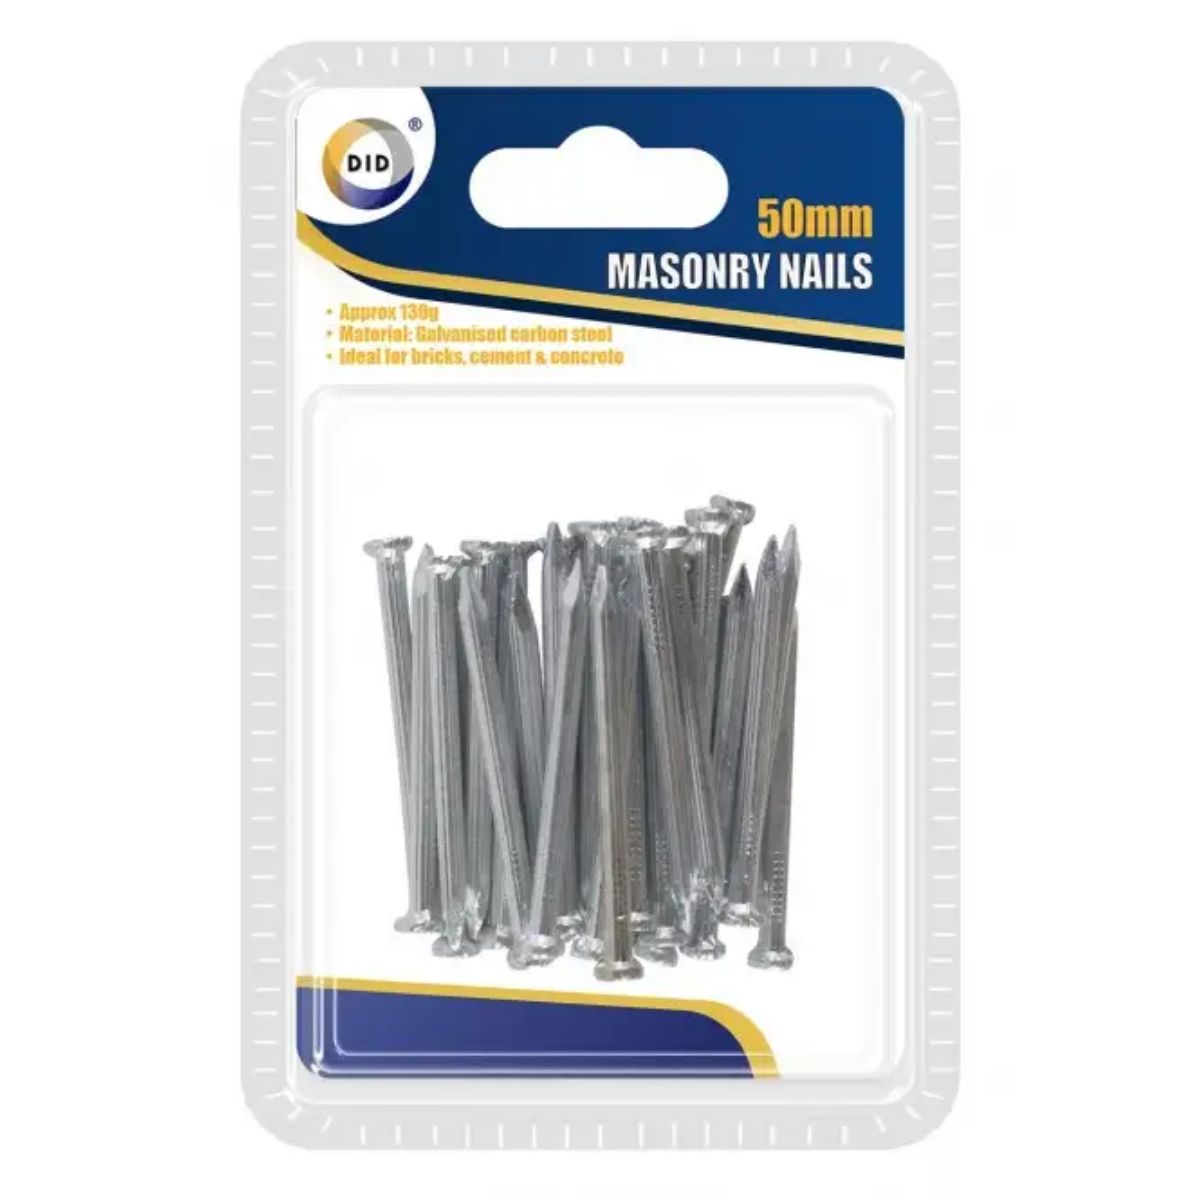 A package of Did - Masonry Nails 50mm suitable for brick, cement, and concrete.